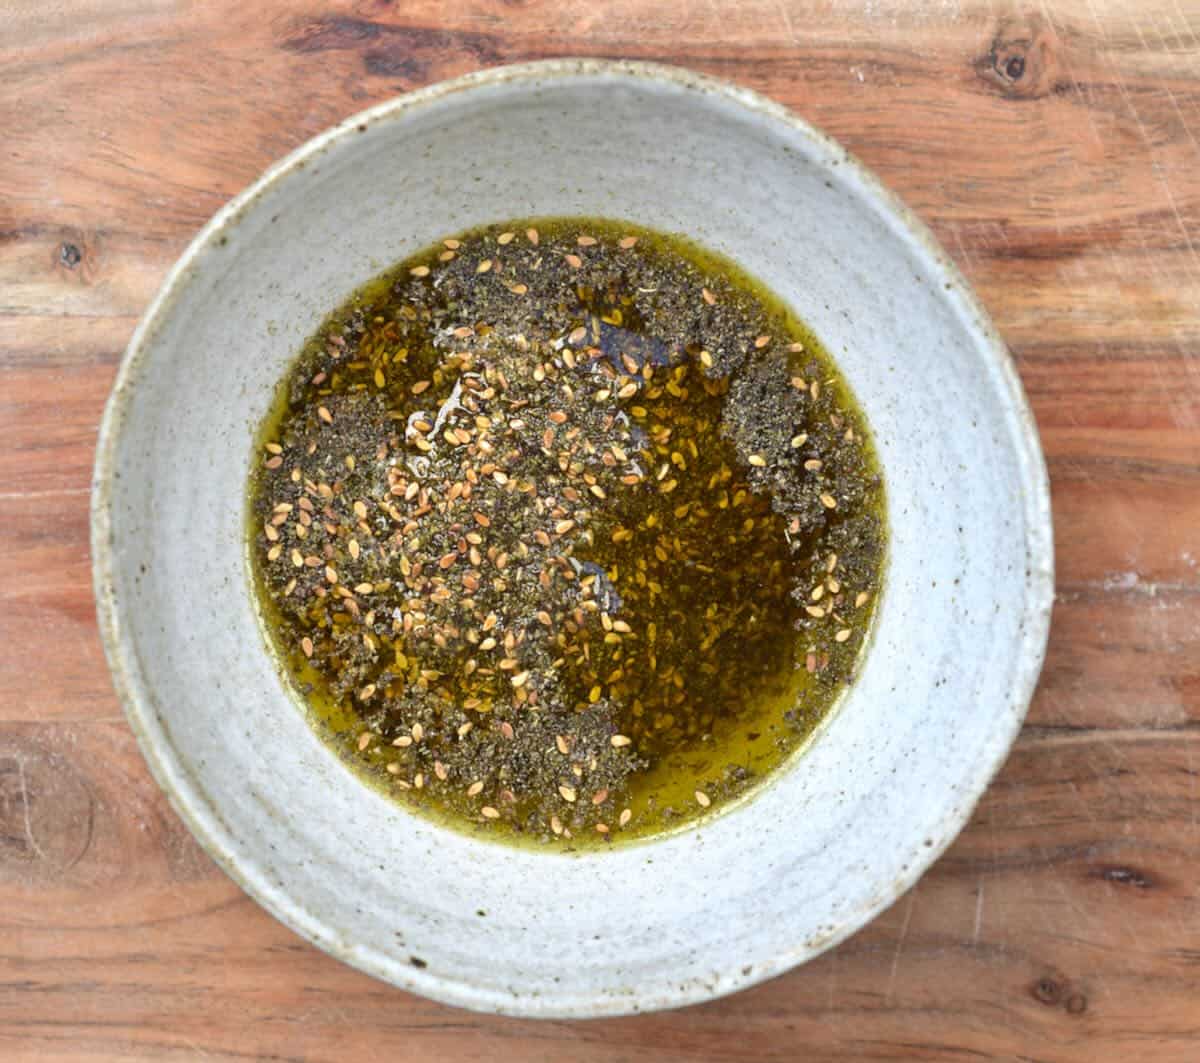 A bowl of za'atar spice and olive oil.